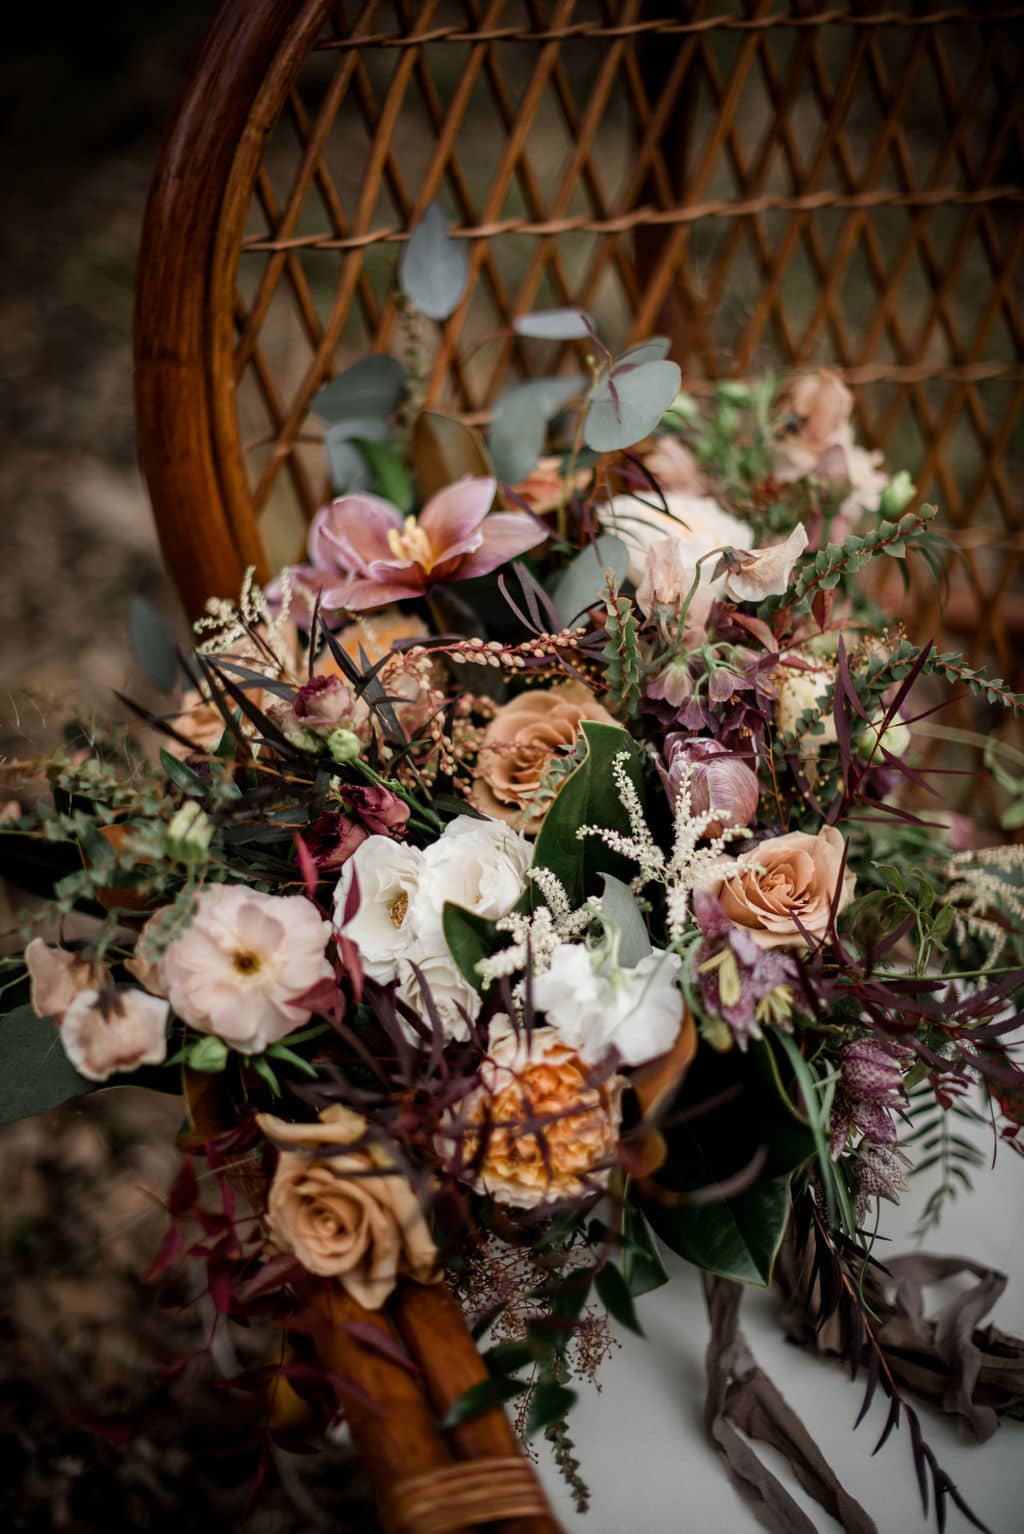 Urban rubbish designed the floral arrangement with a mixture of Texas seasonal florals